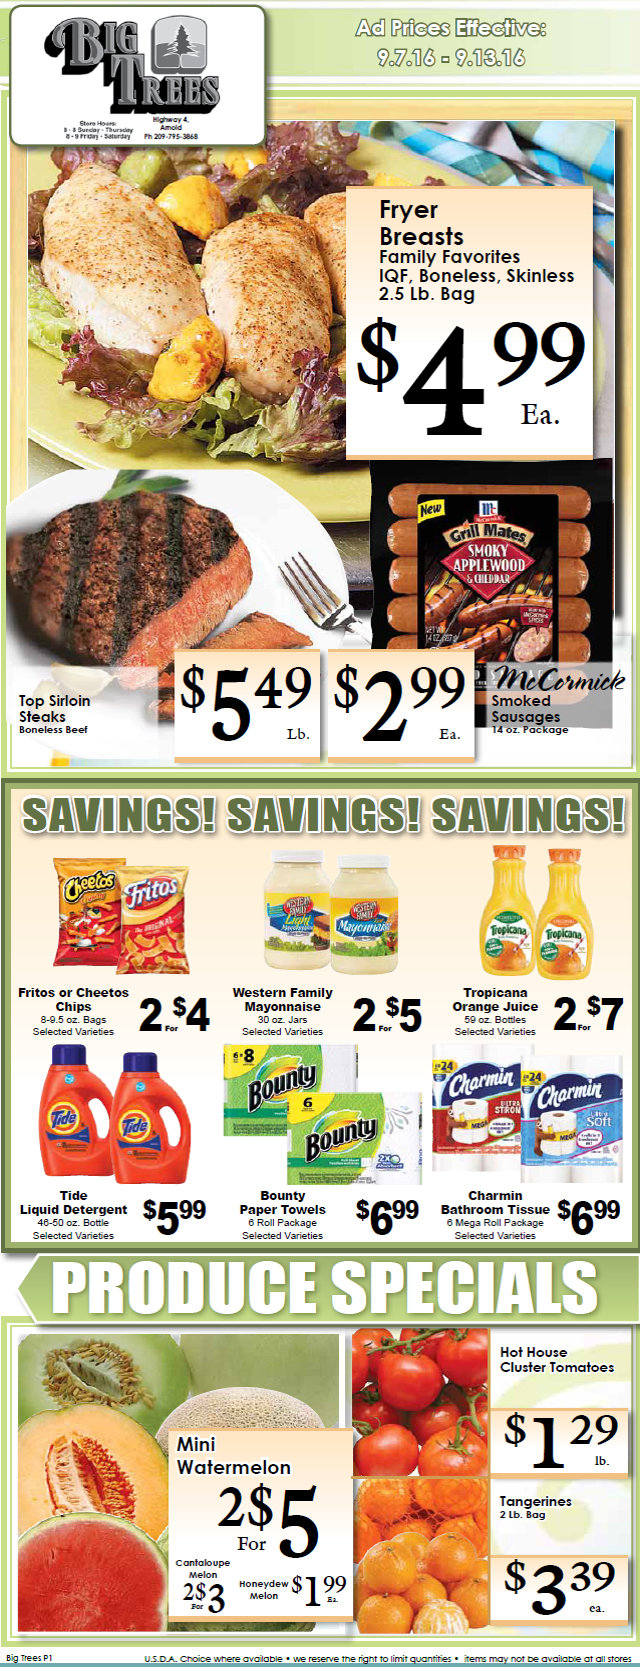 Big Trees Market Weekly Specials & Grocery Ads Through September 13th